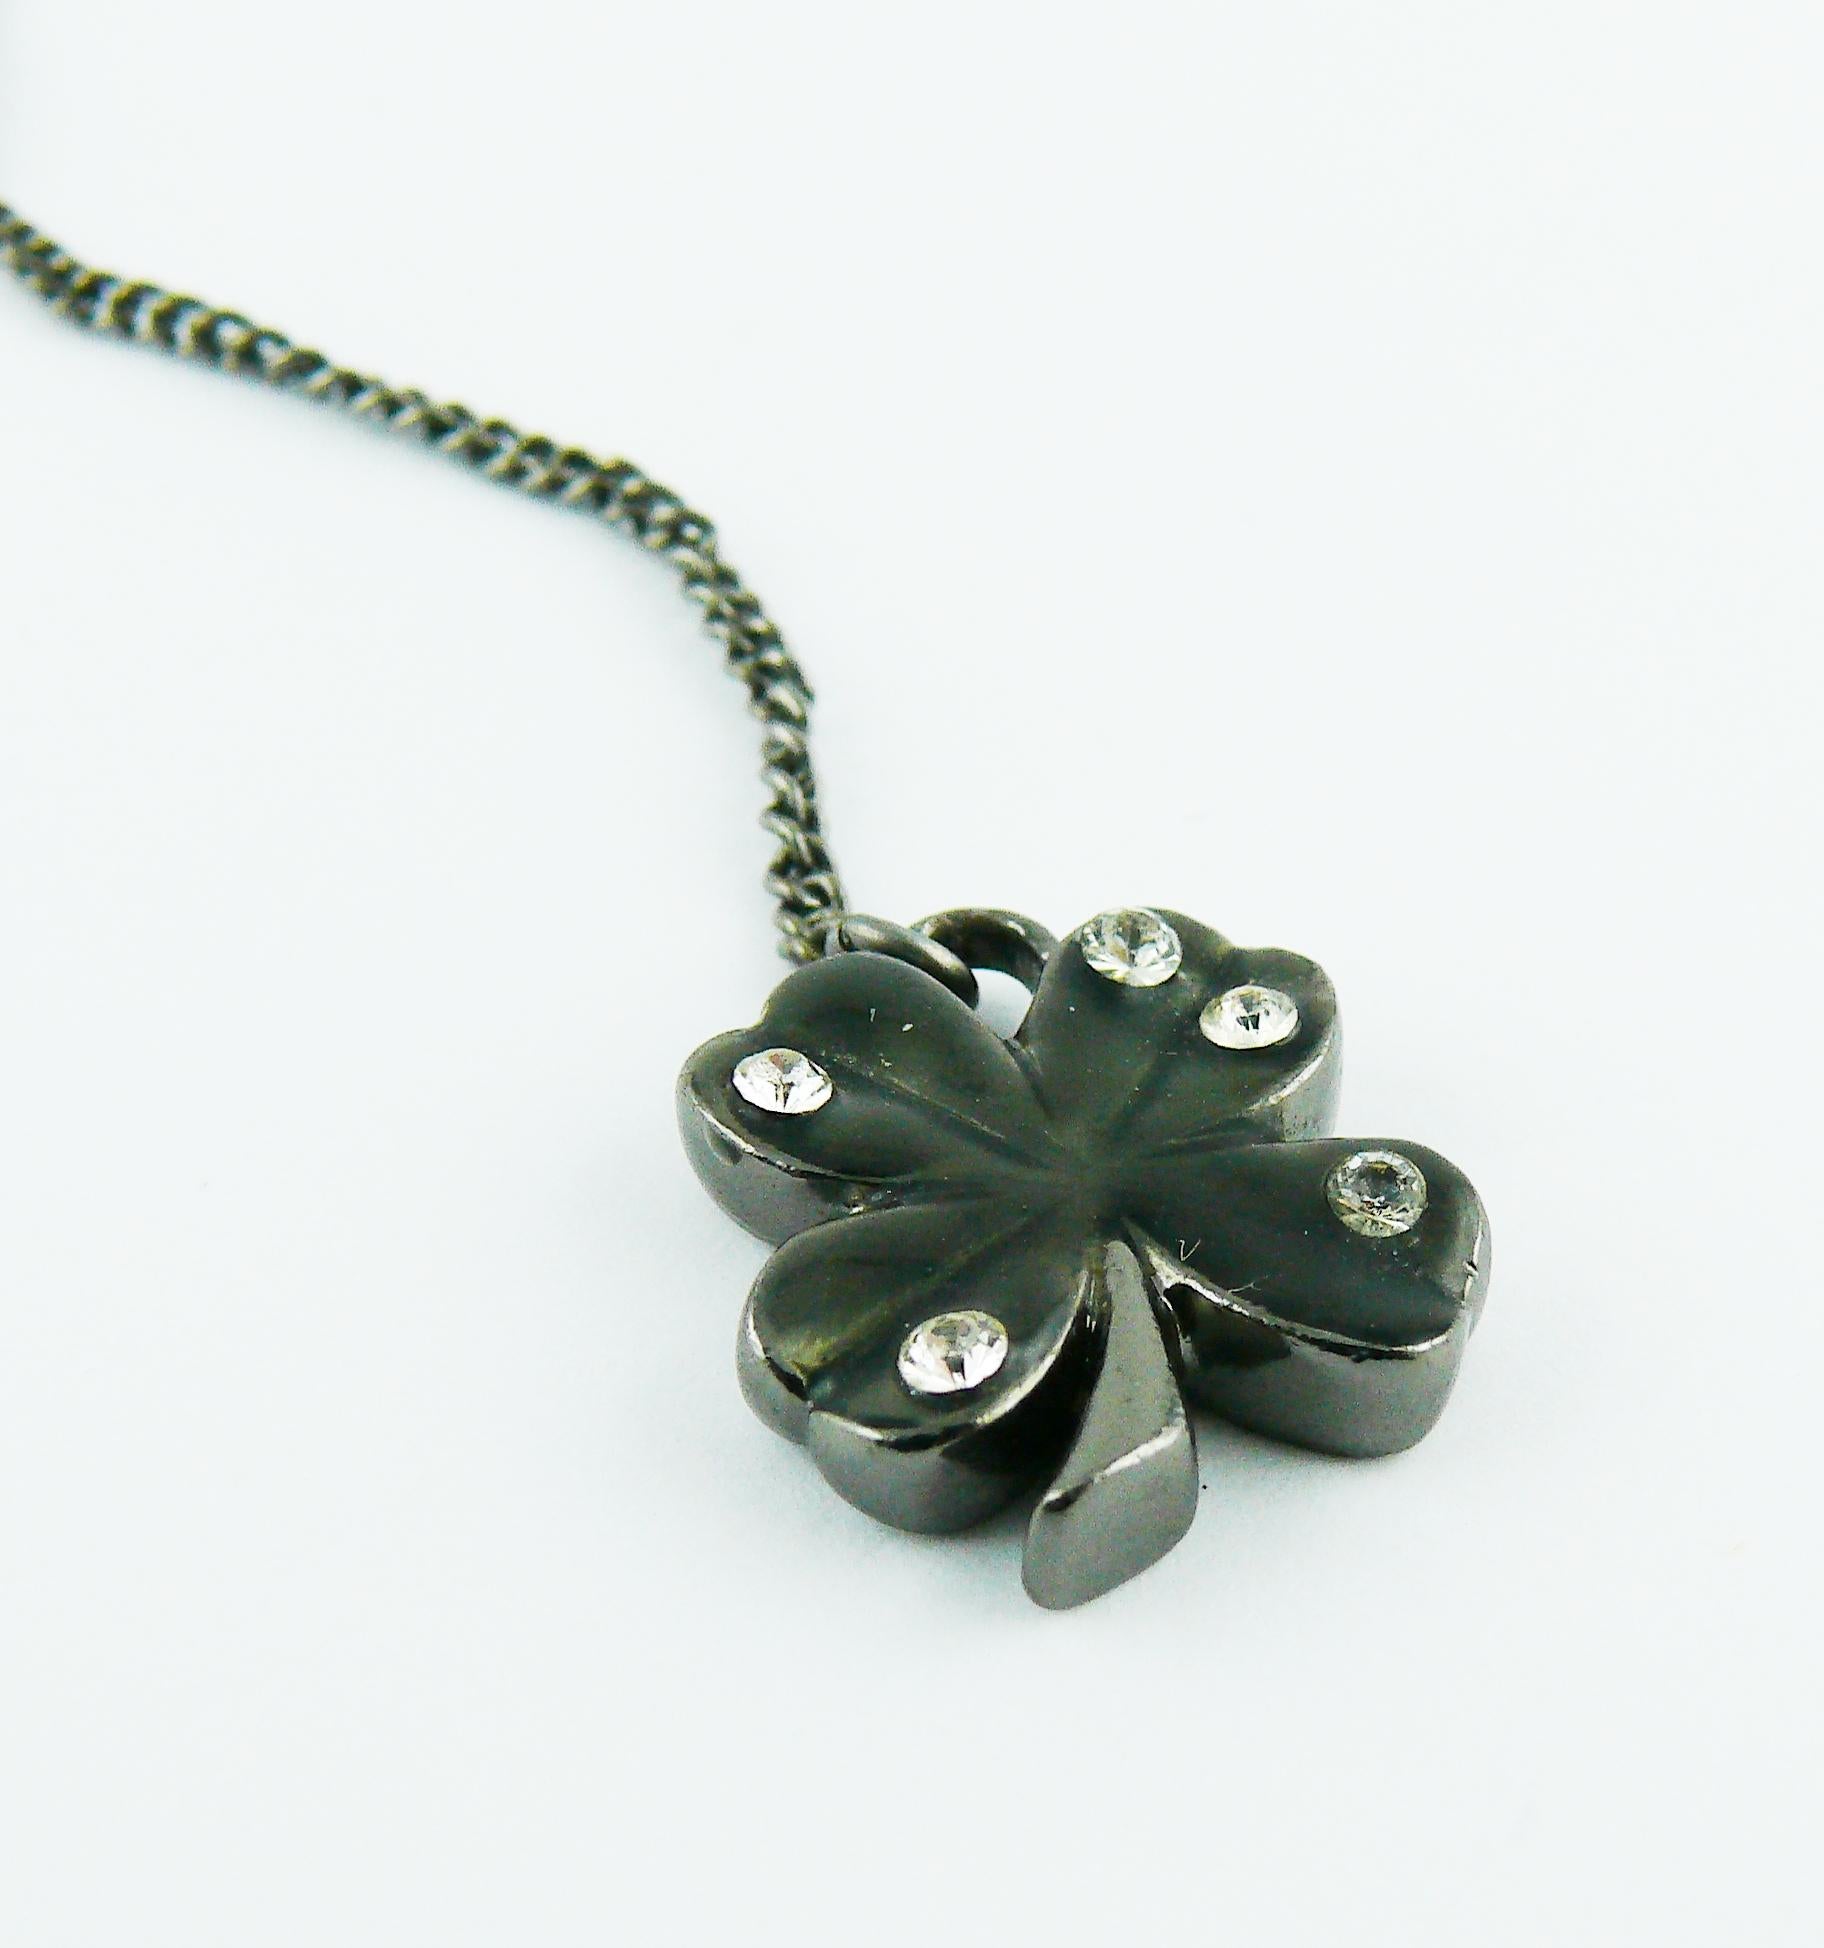 Chanel Ruthenium CC Pendant Necklace with N°5 and Clover 5